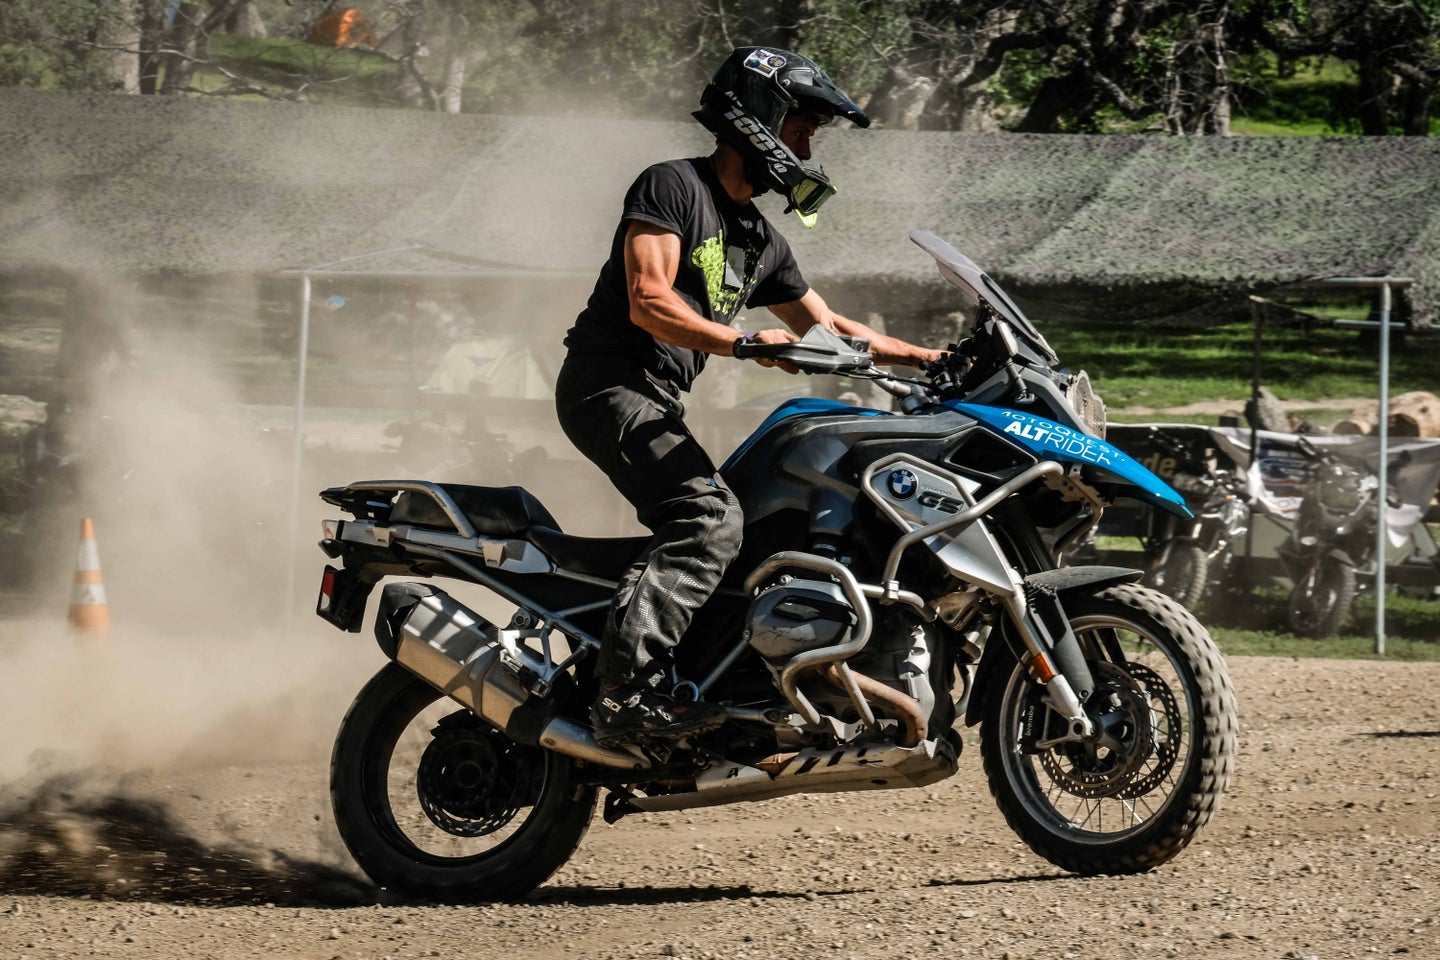 New Motorcyclists Experience Adventure Motorcycles During RawHyde Adventure Days